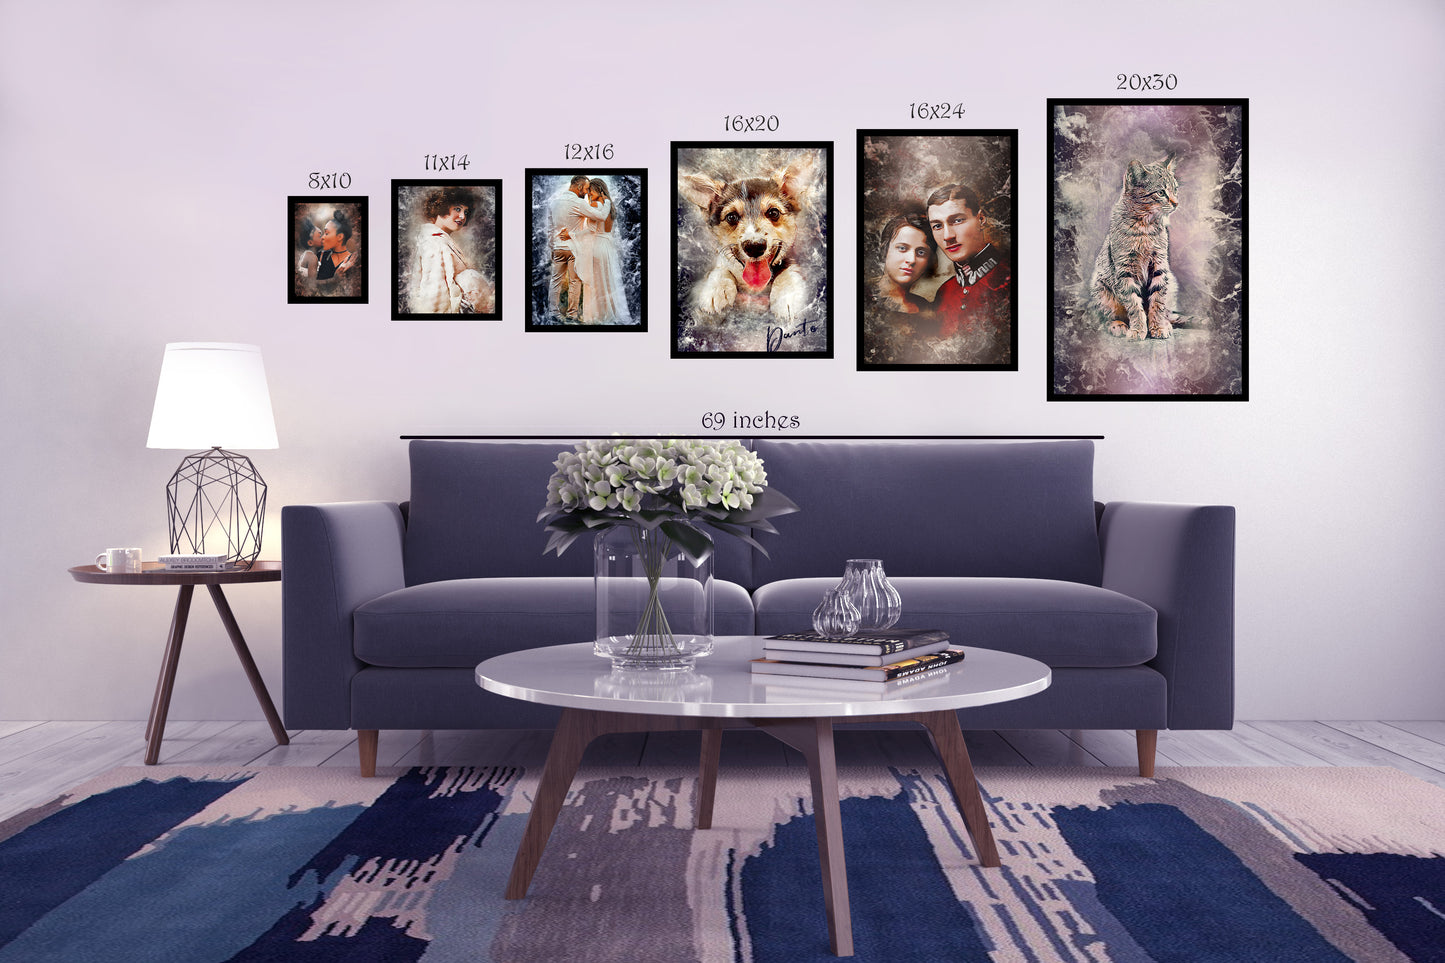 Pet Pics -Gradient Abstract - Framed Vertical Poster